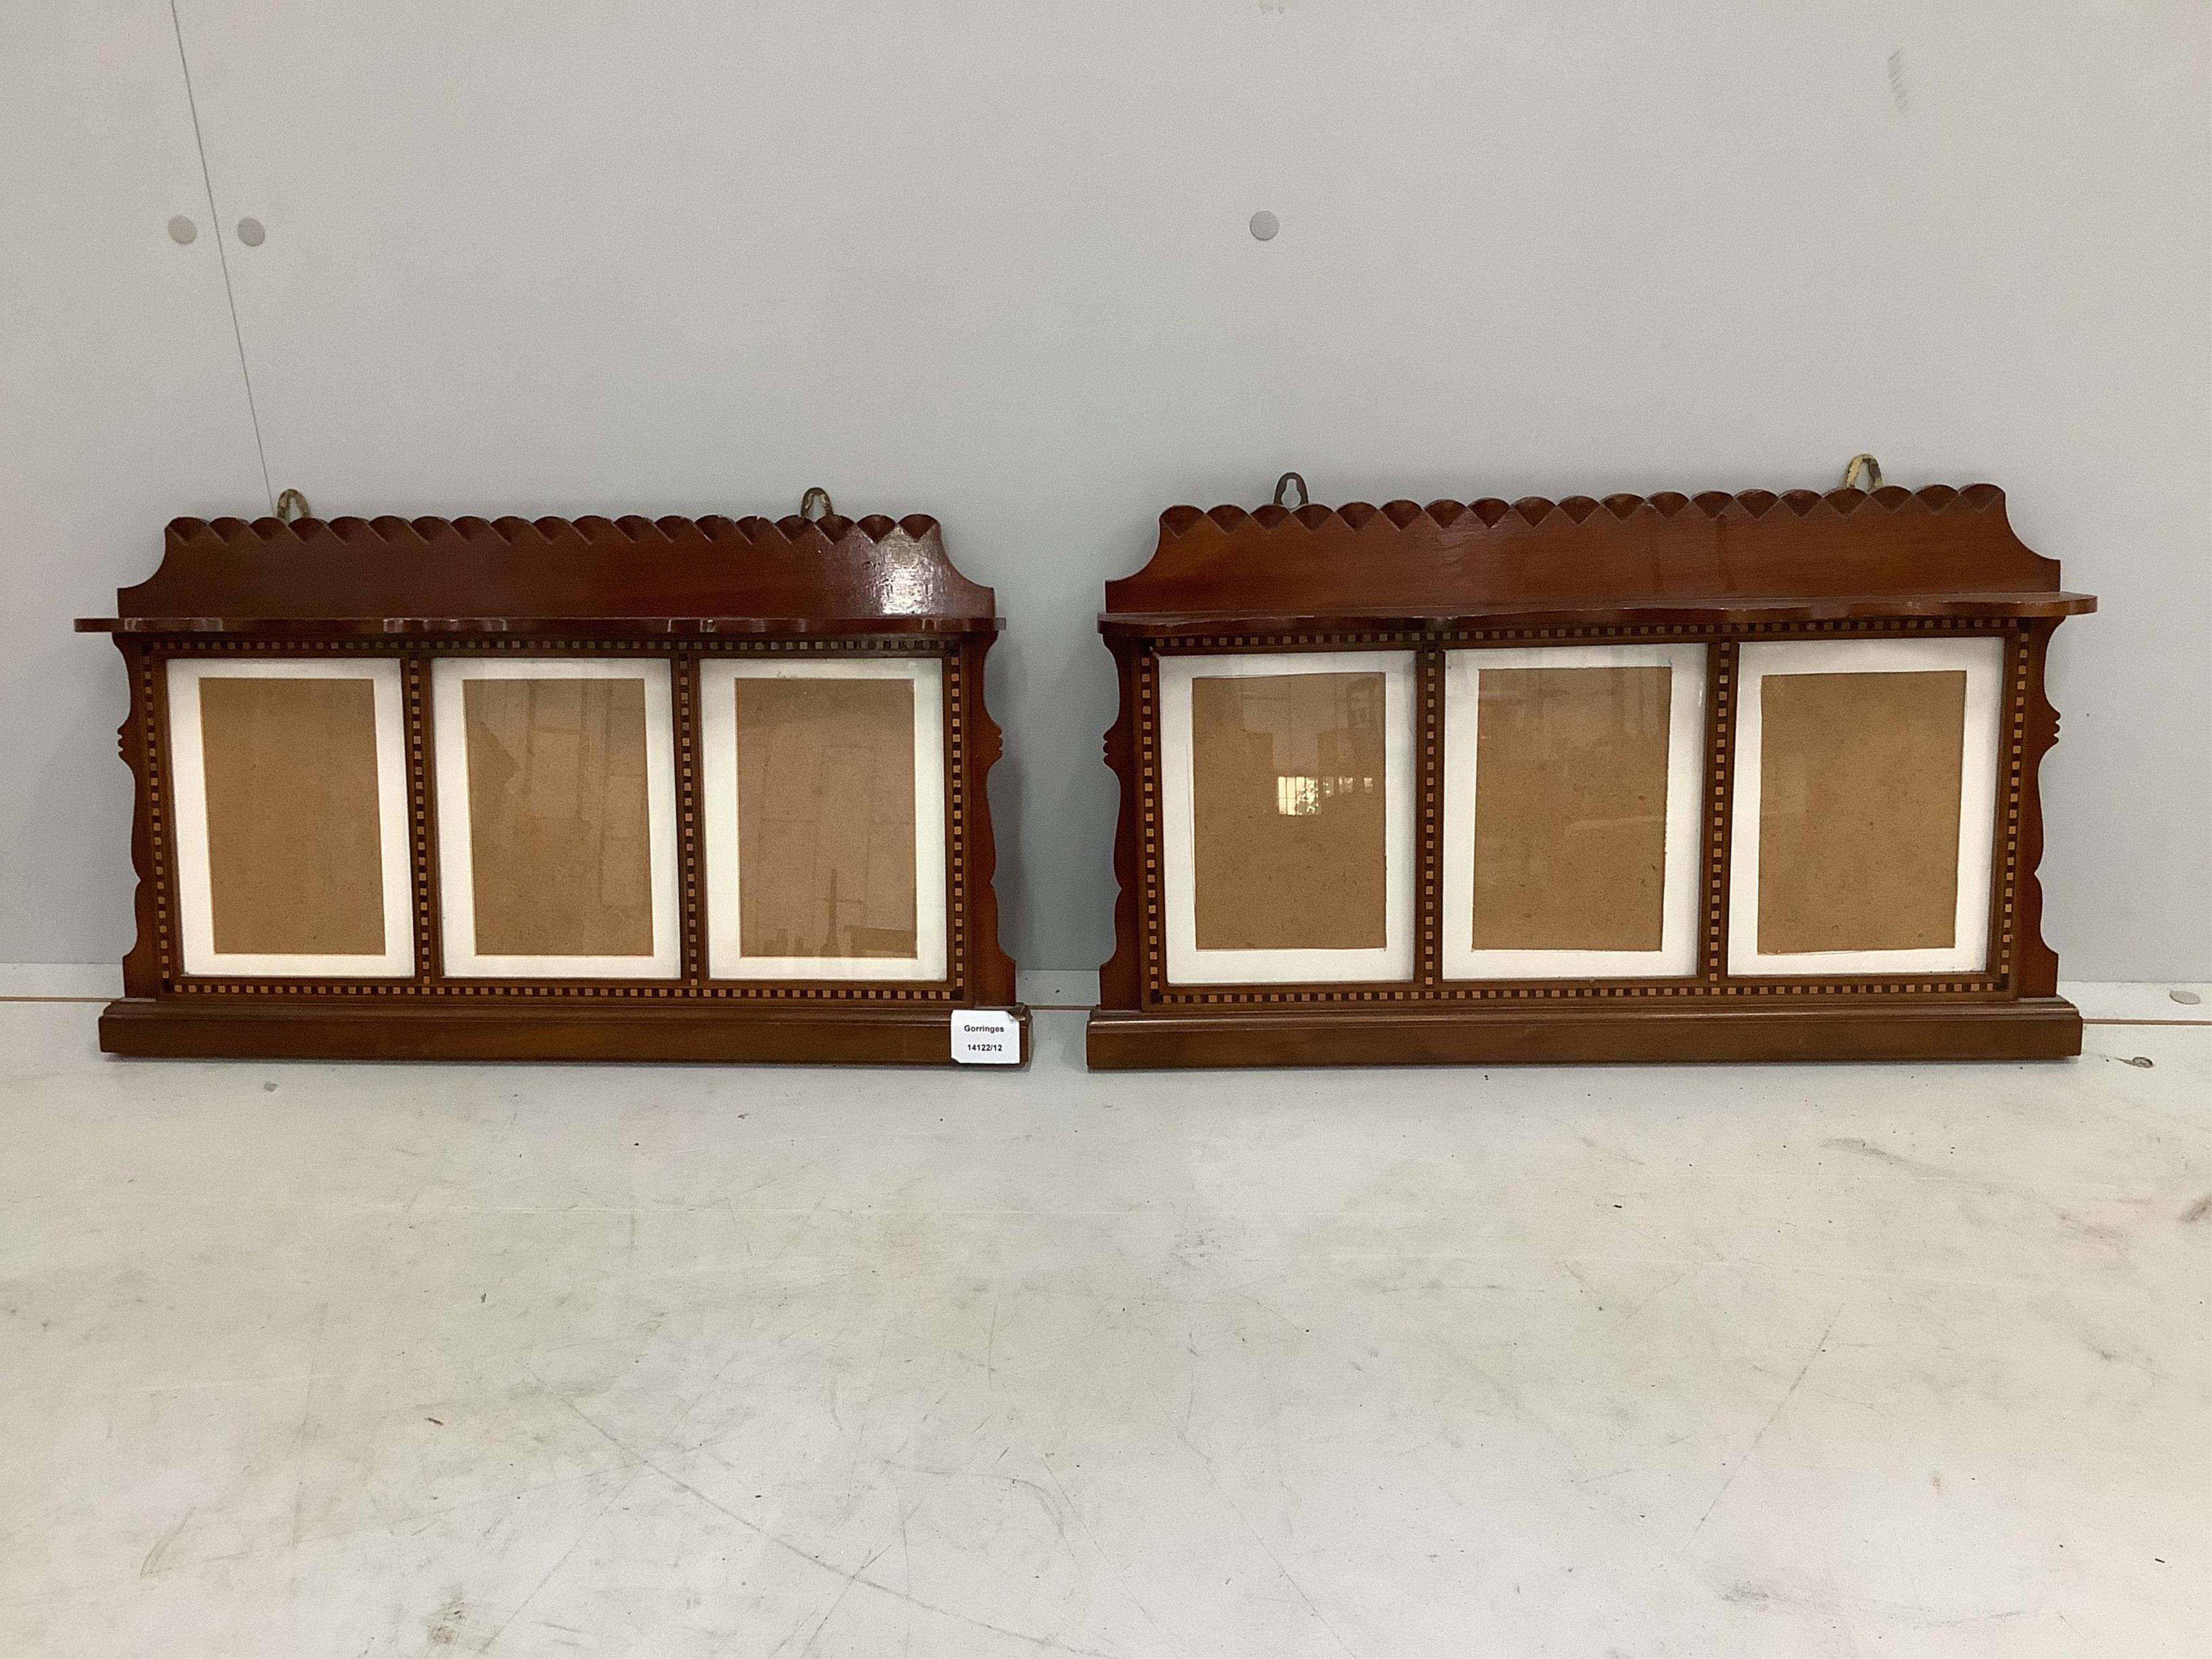 A pair of Edwardian style mahogany triptych wall-hanging photograph frames, width 54cm, height 32cm